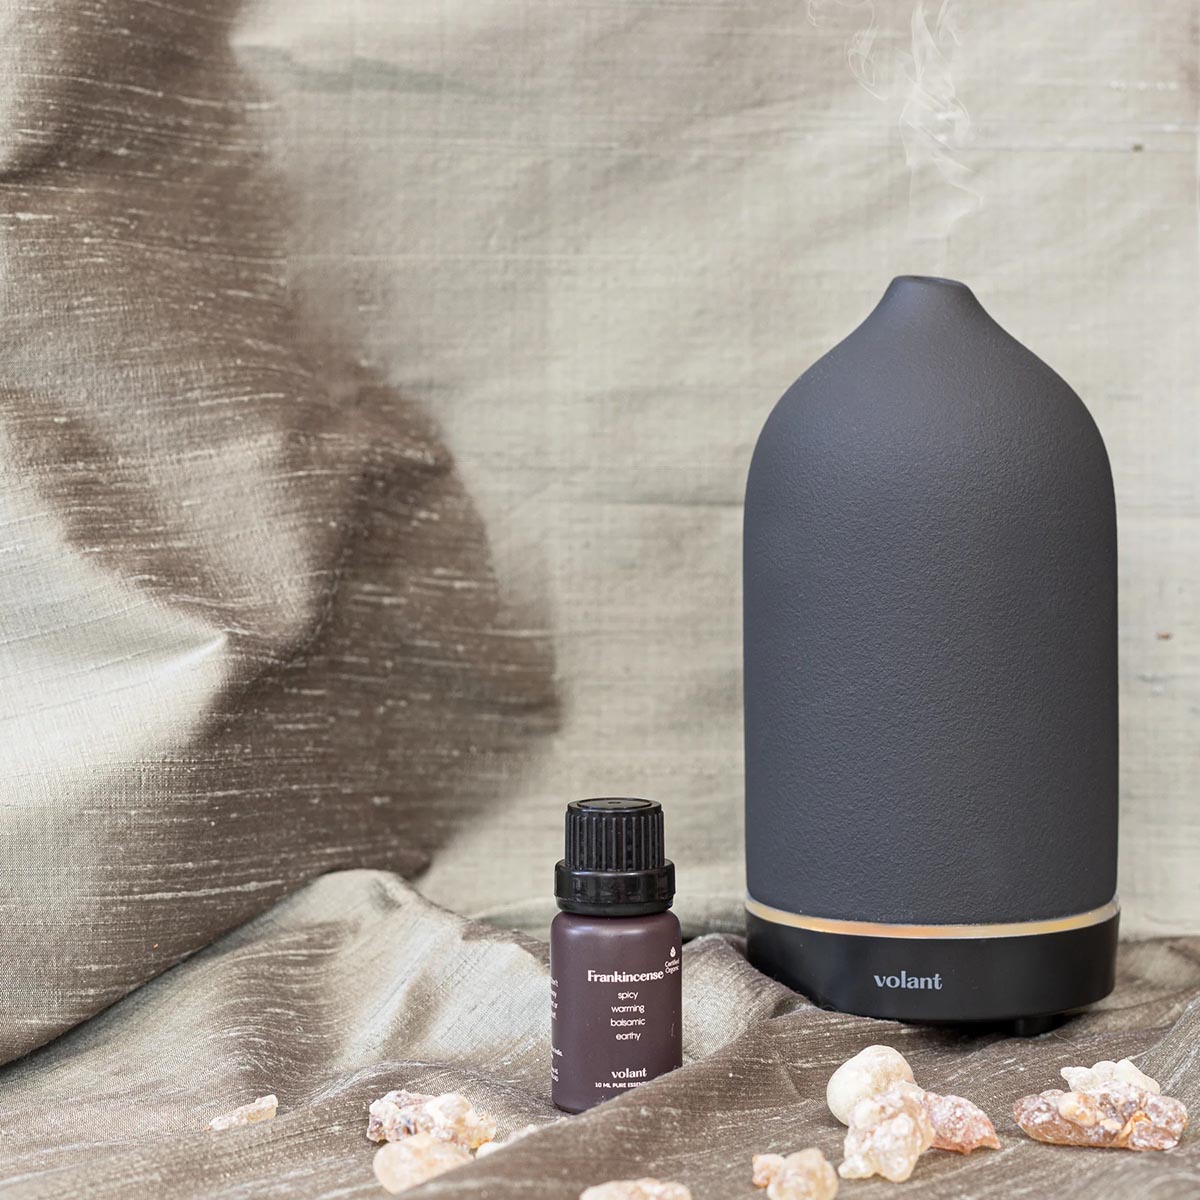 What Is Frankincense Essential Oil Good For In A Diffuser